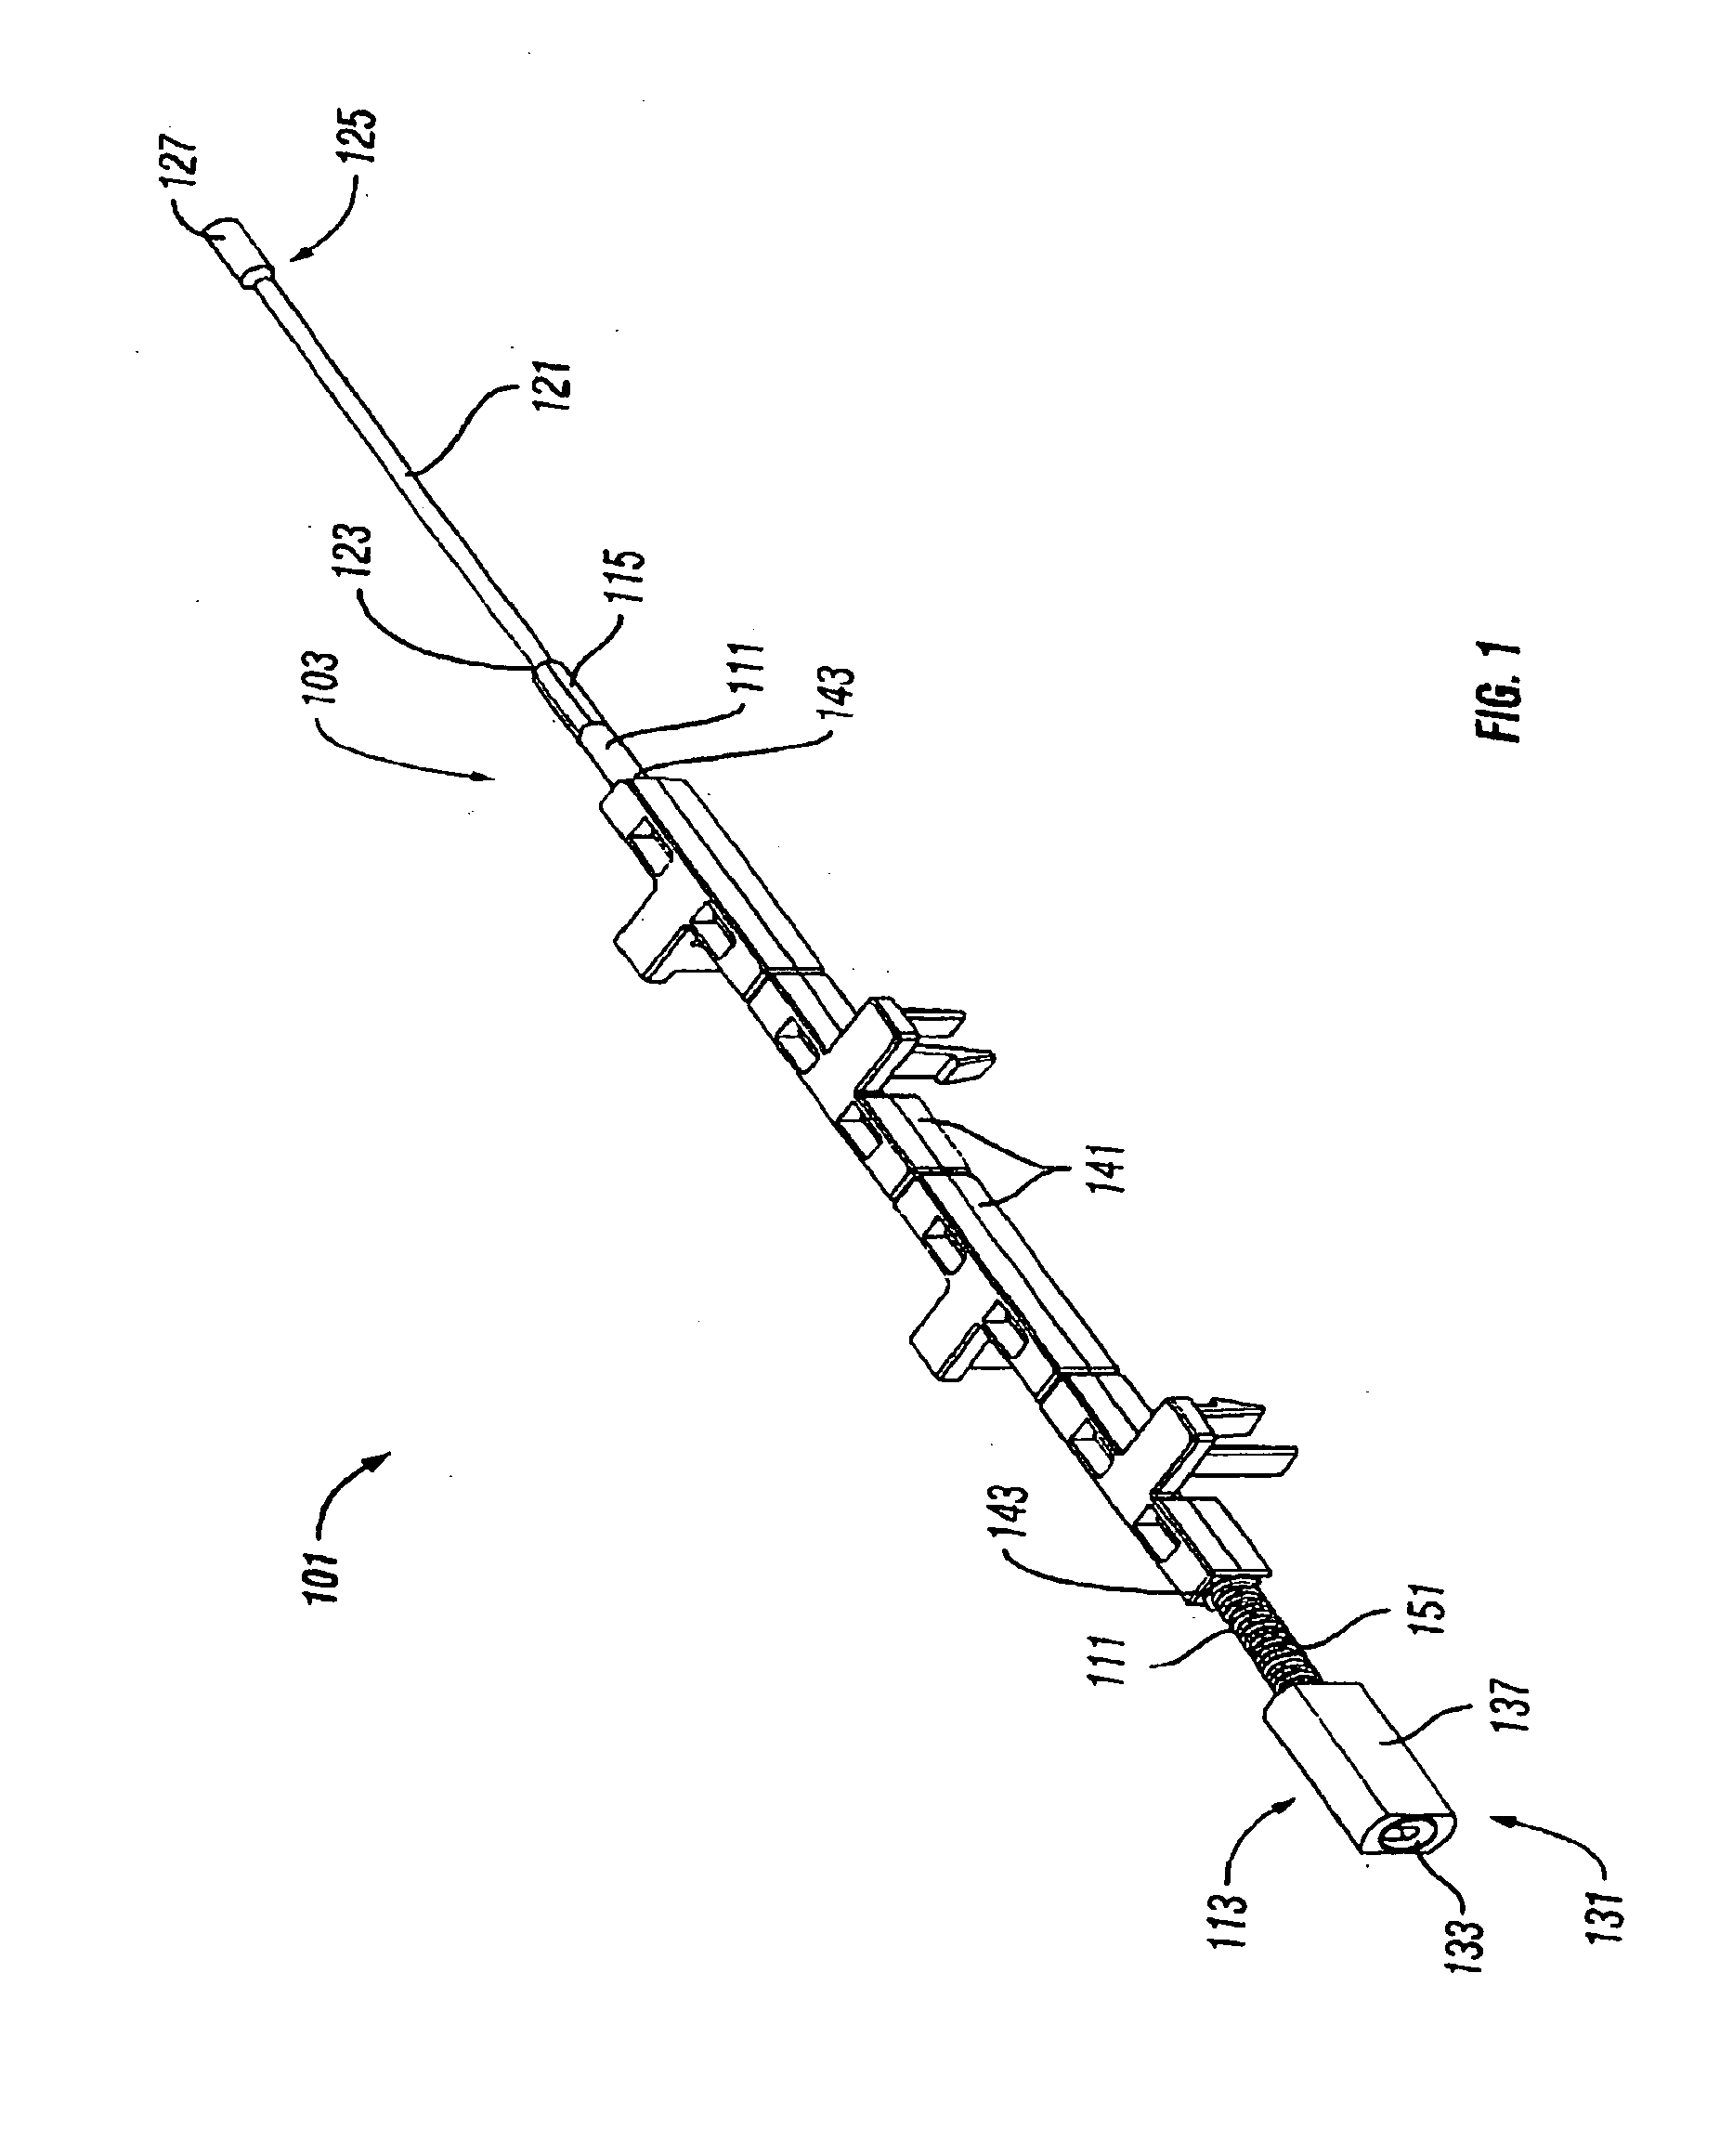 Rod Assembly Connector for Mounting Light Emitting Display Apparatuses